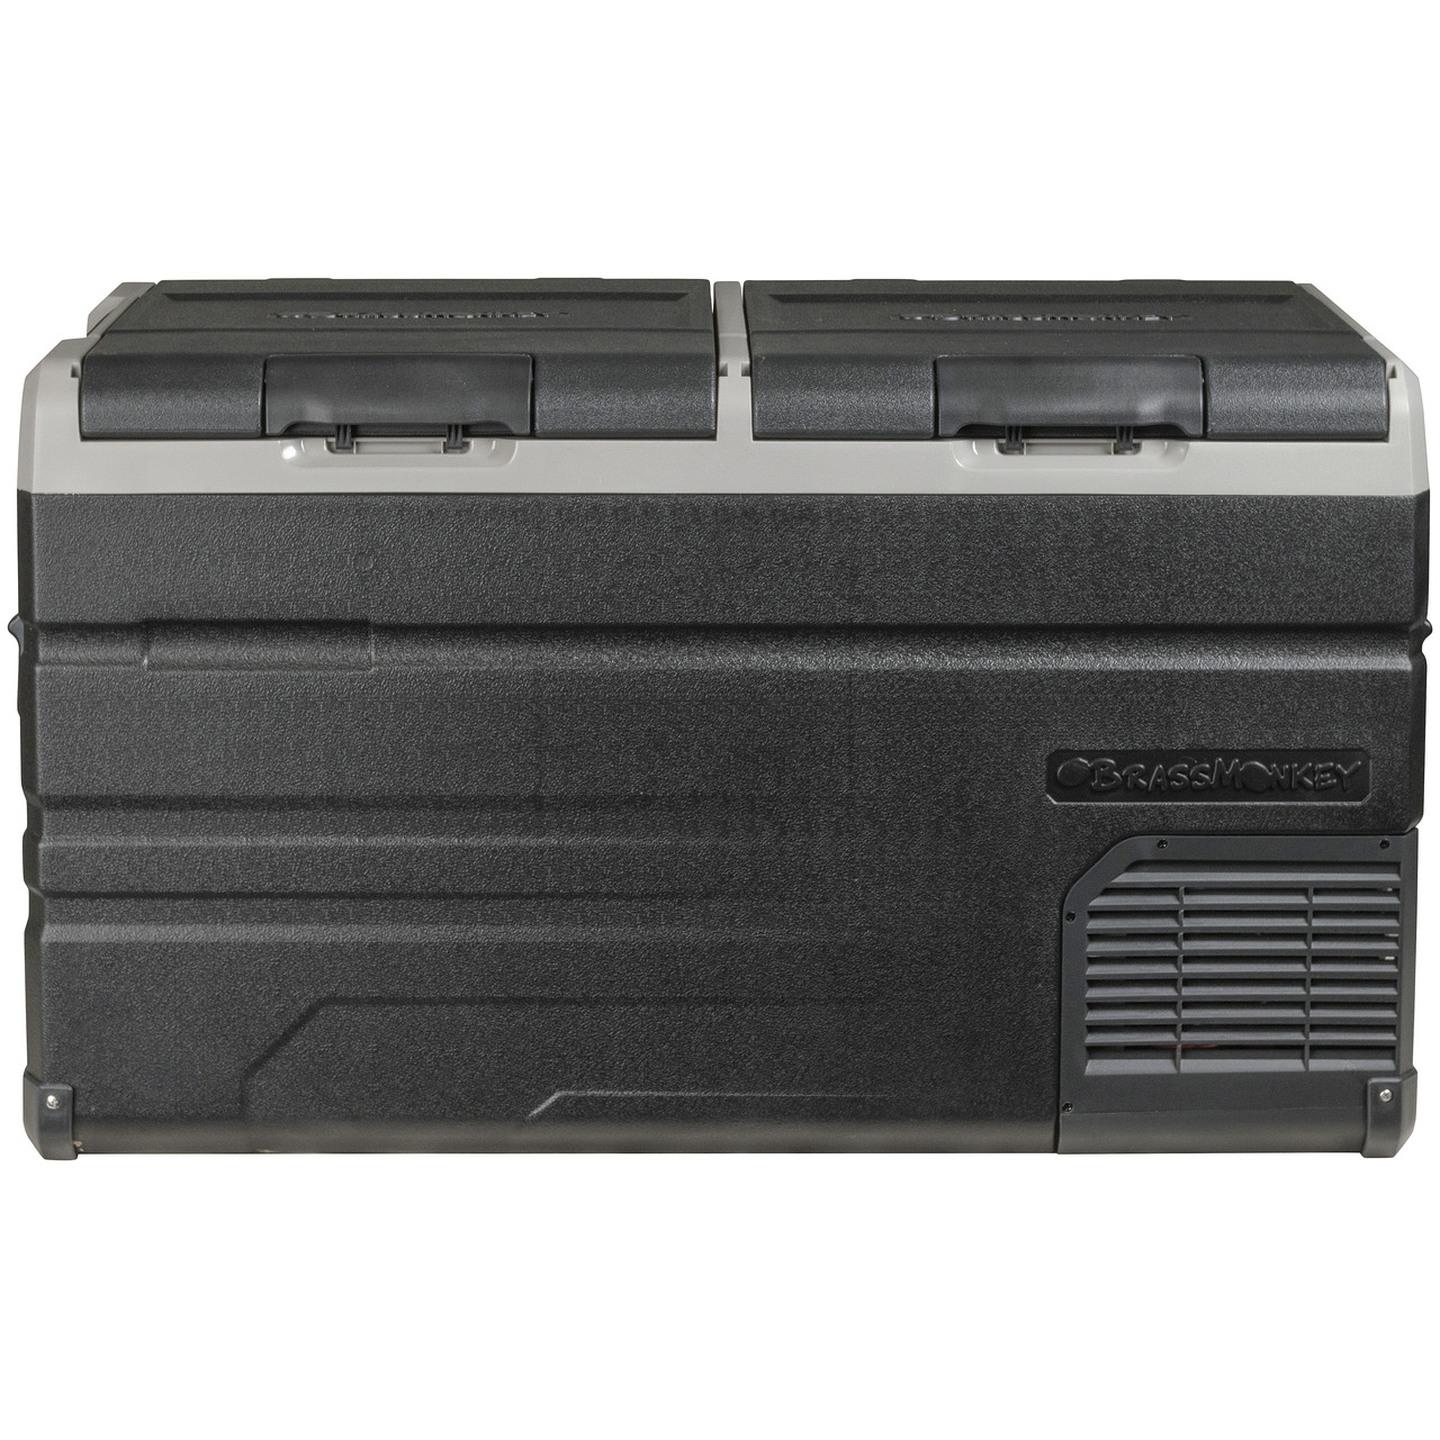 115L Brass Monkey Portable Low Profile Dual Zone Fridge/Freezer with Battery Compartment